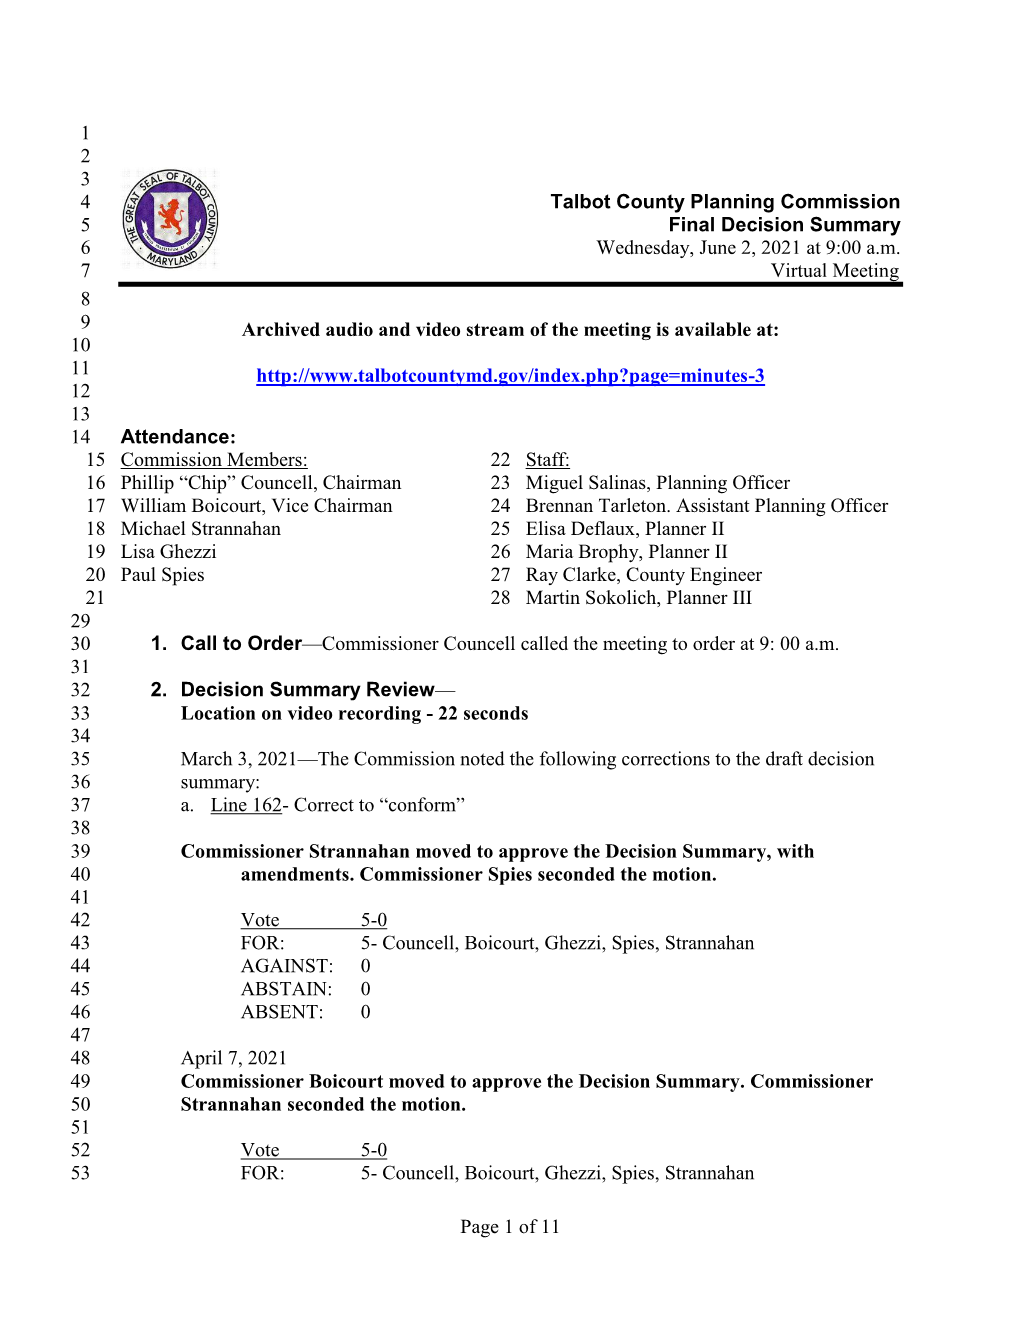 Page 1 of 11 1 2 3 Talbot County Planning Commission 4 Final Decision Summary 5 Wednesday, June 2, 2021 at 9:00 A.M. 6 Virtual